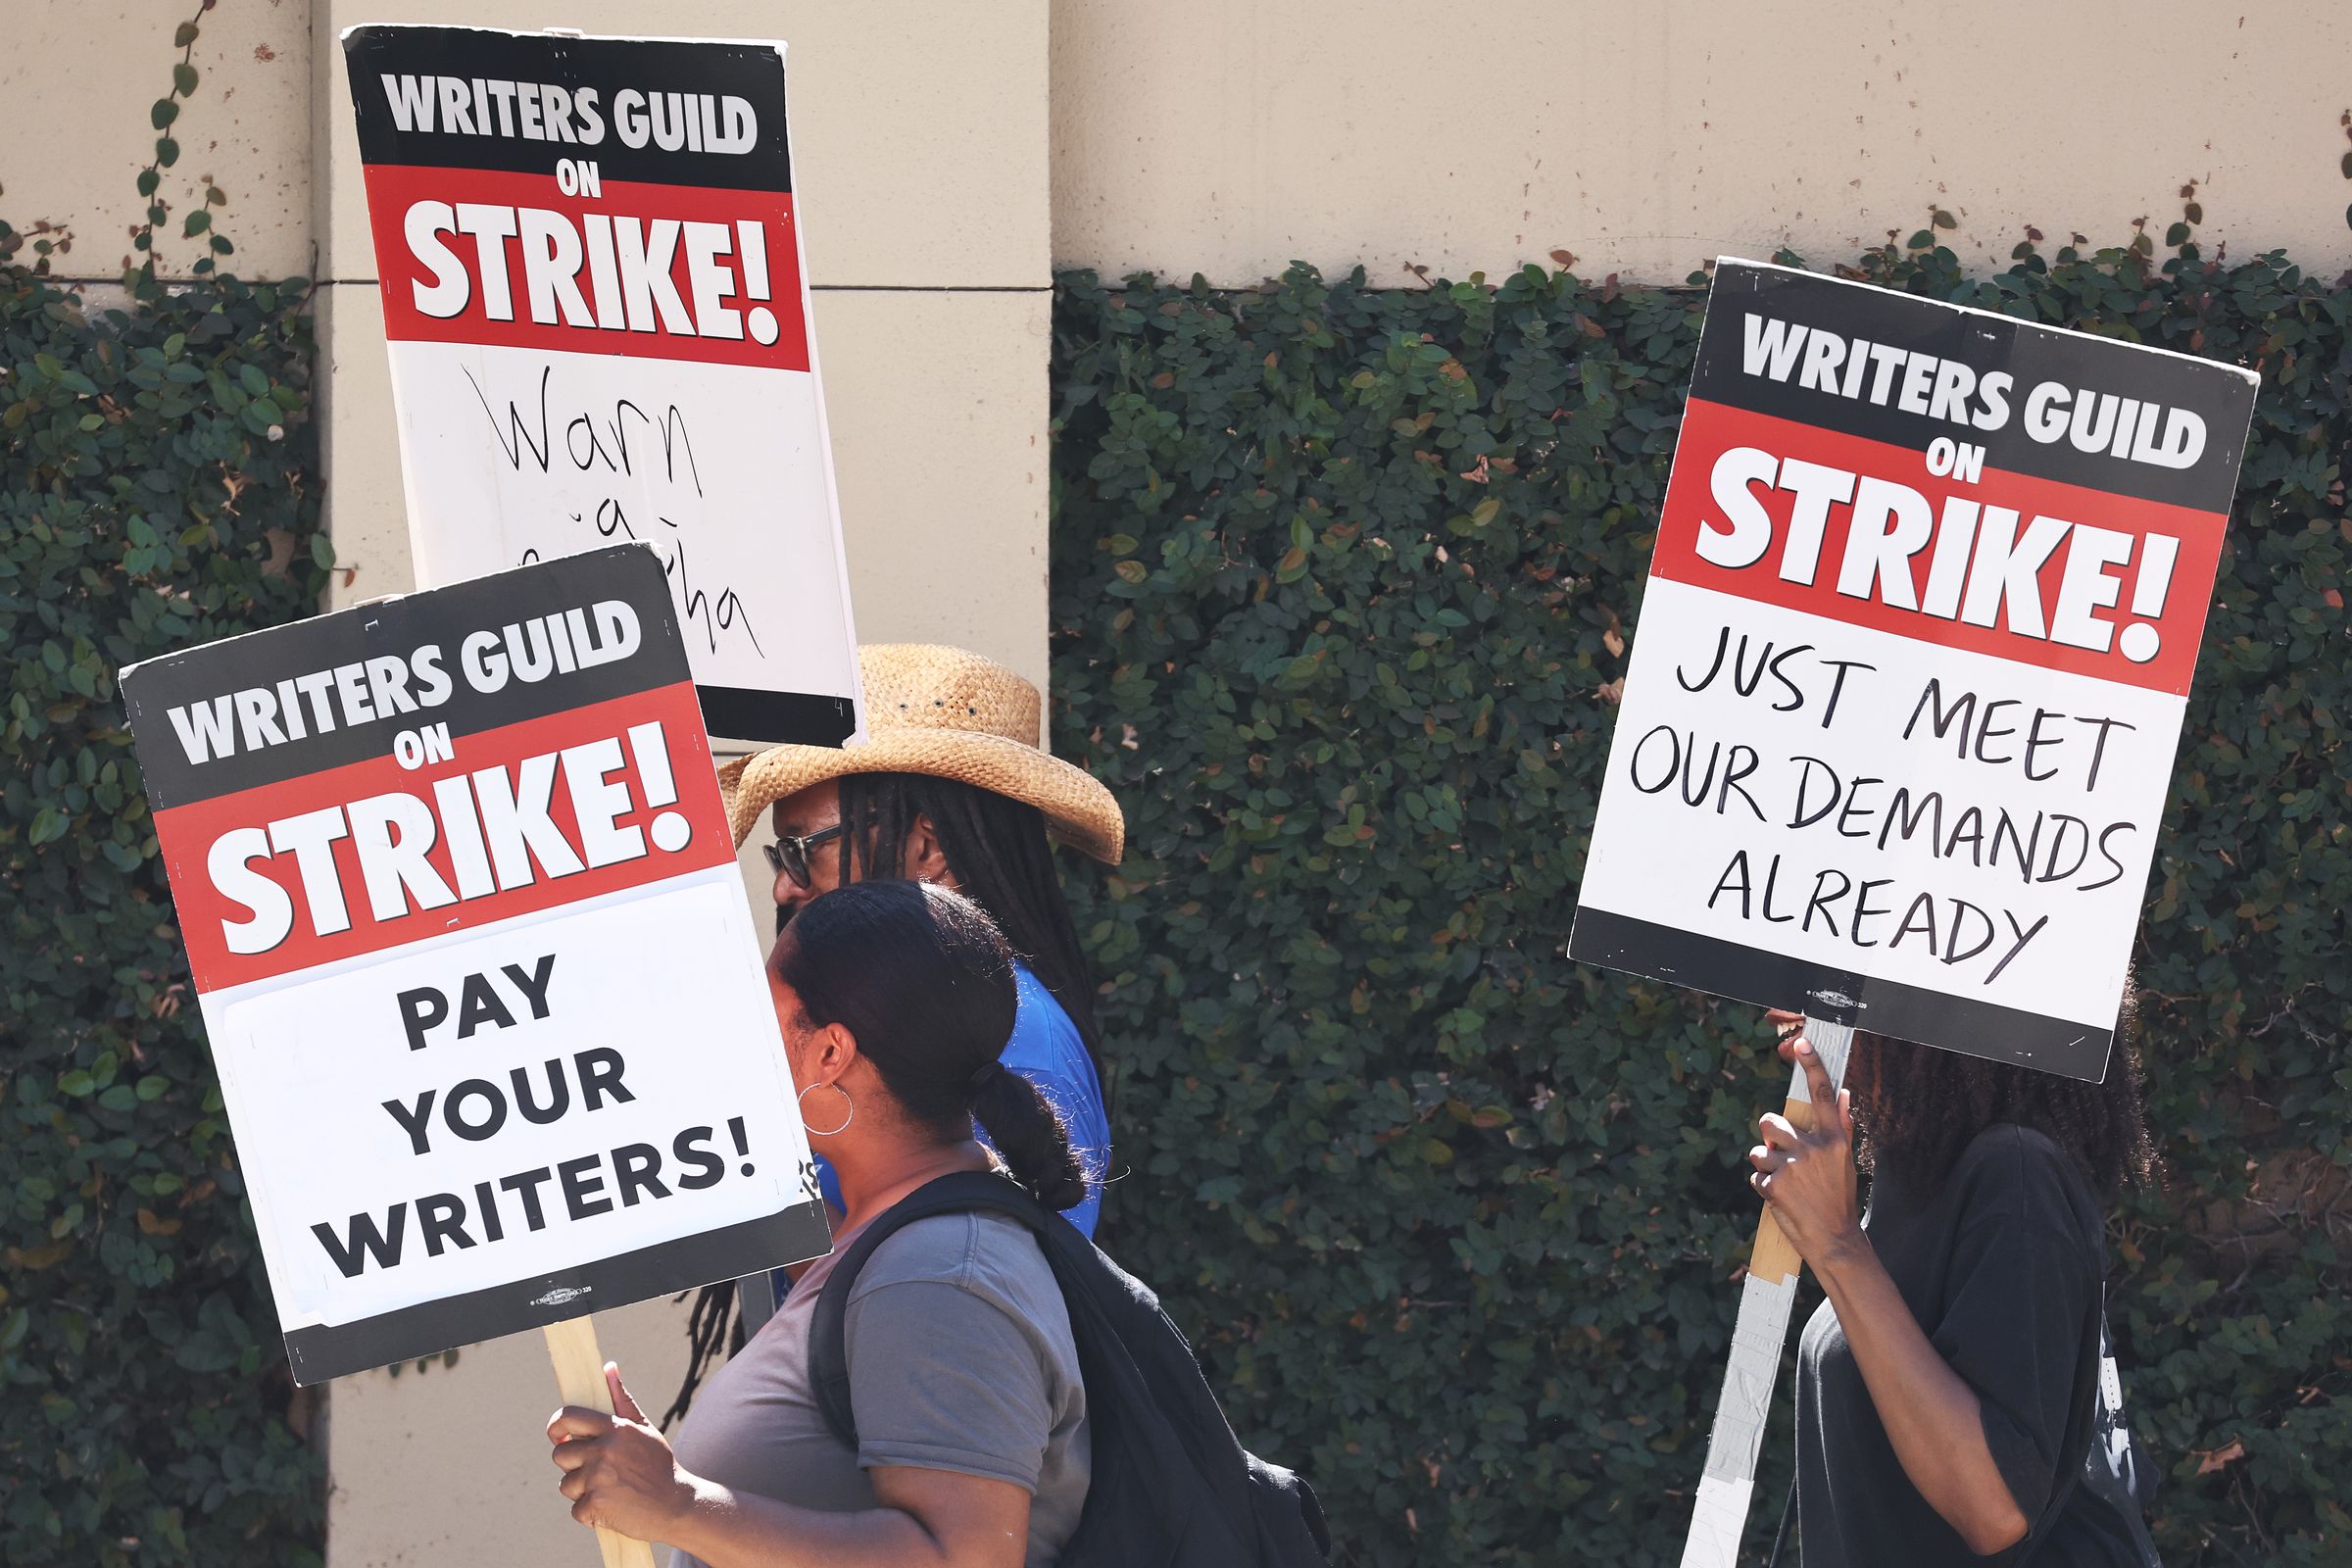 A photo showing writers on strike